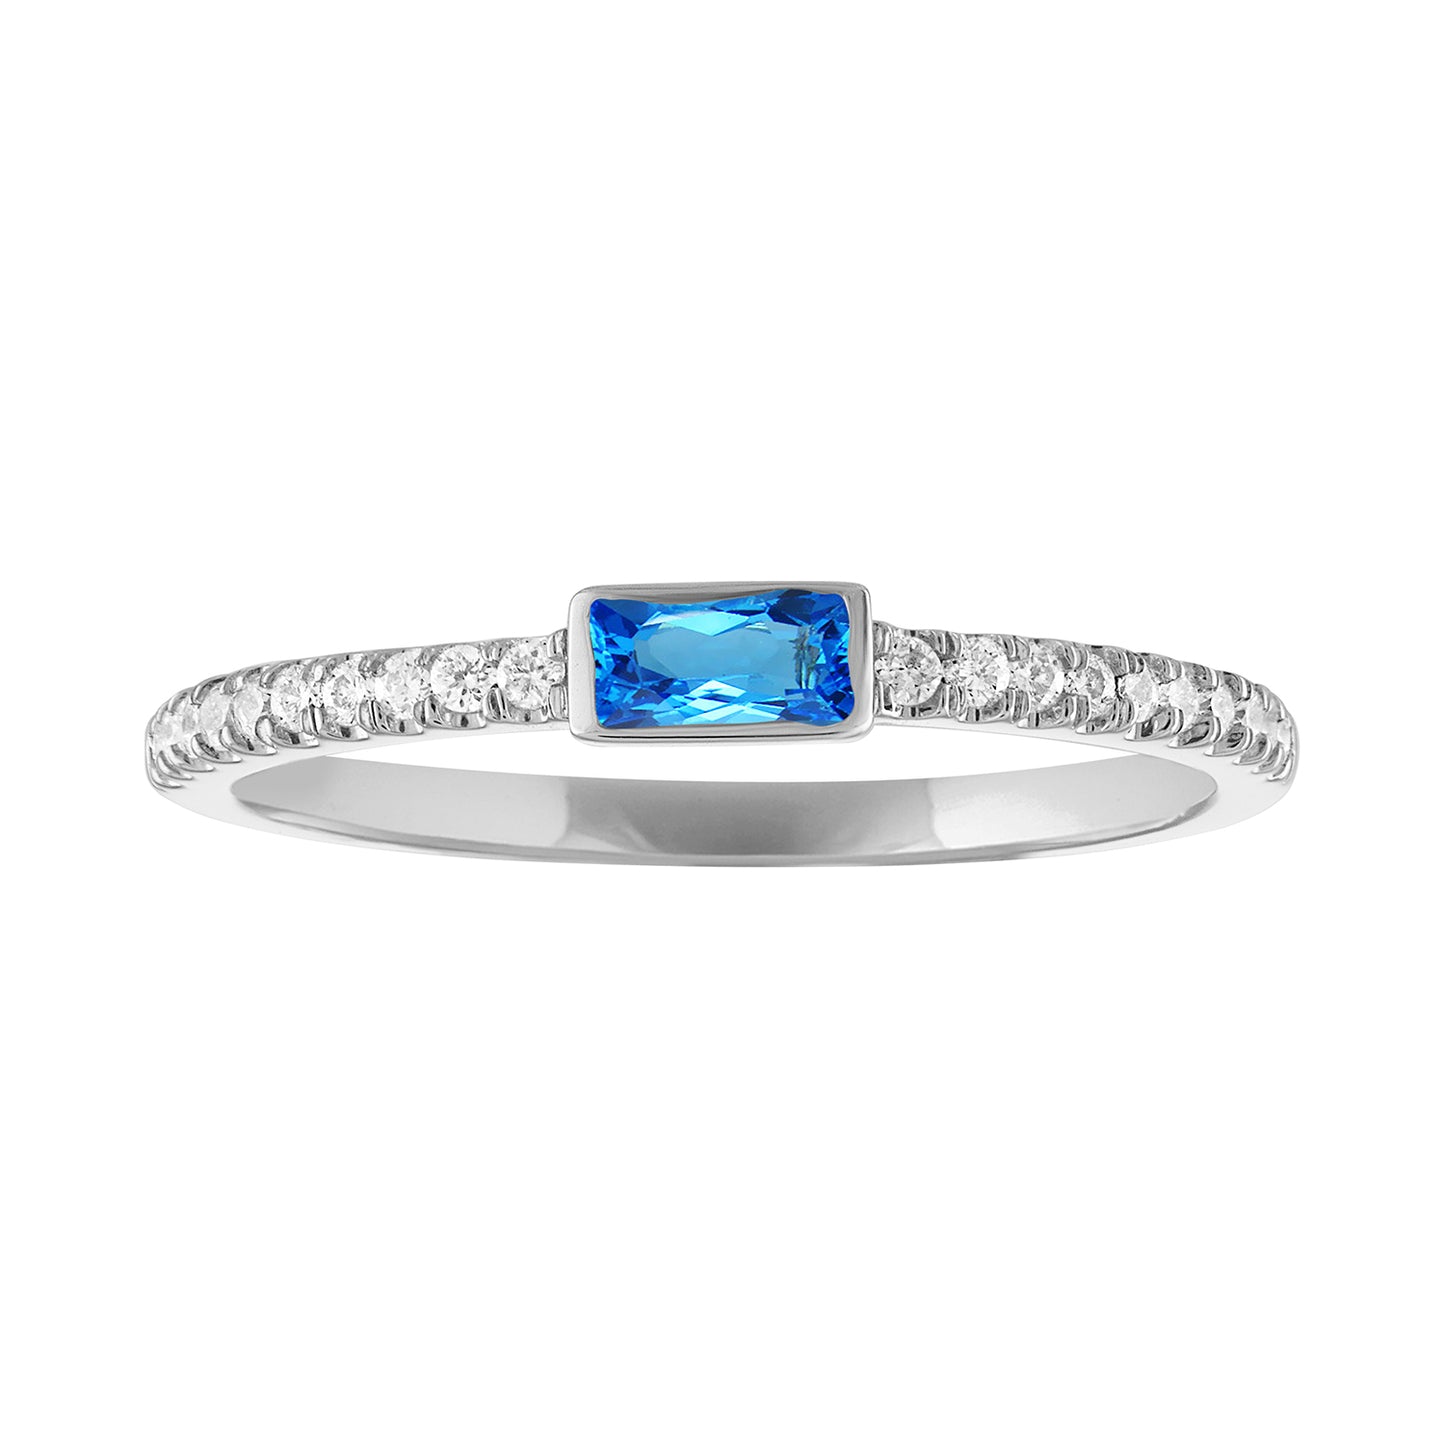 White gold skinny band with bezeled blue topaz baguette in the center and round diamonds on the shank. 